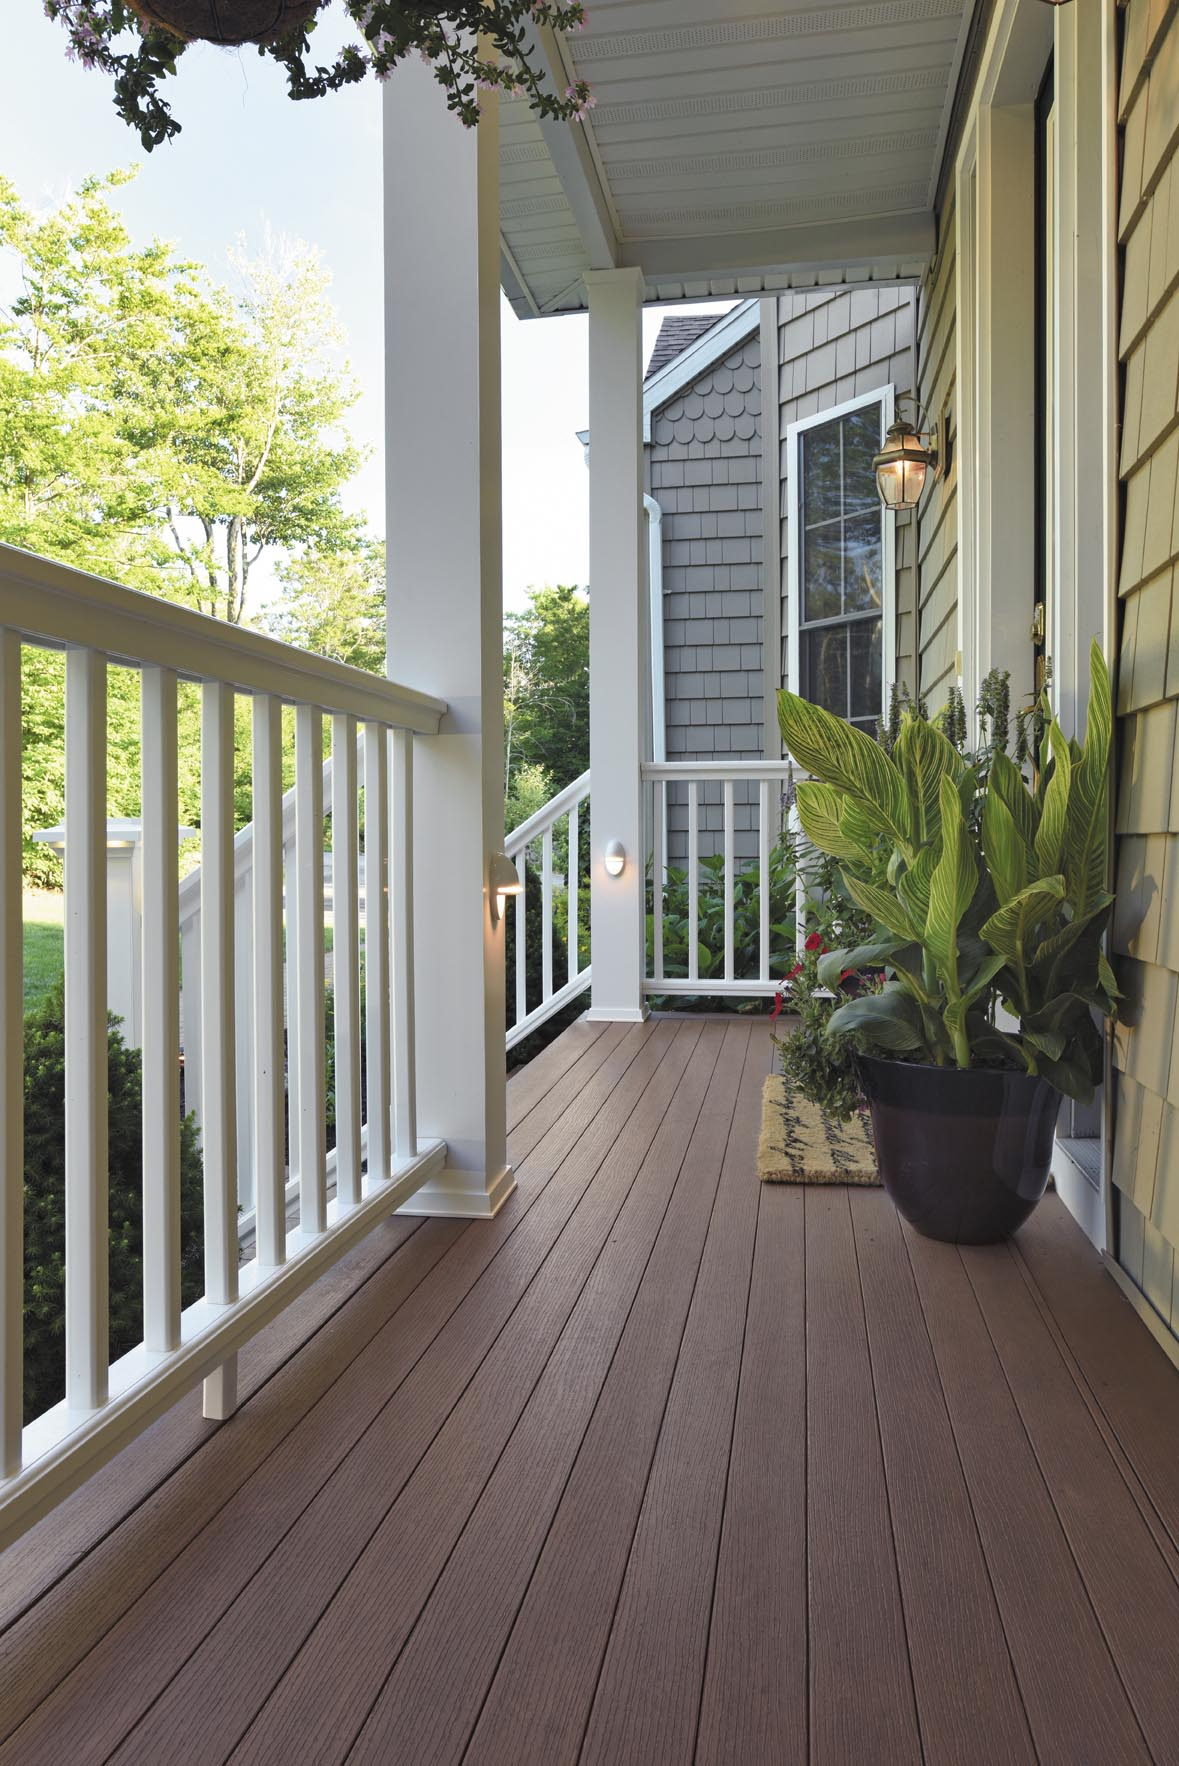 Lighting Products For Decks Porches Railings Timbertech inside measurements 1179 X 1766